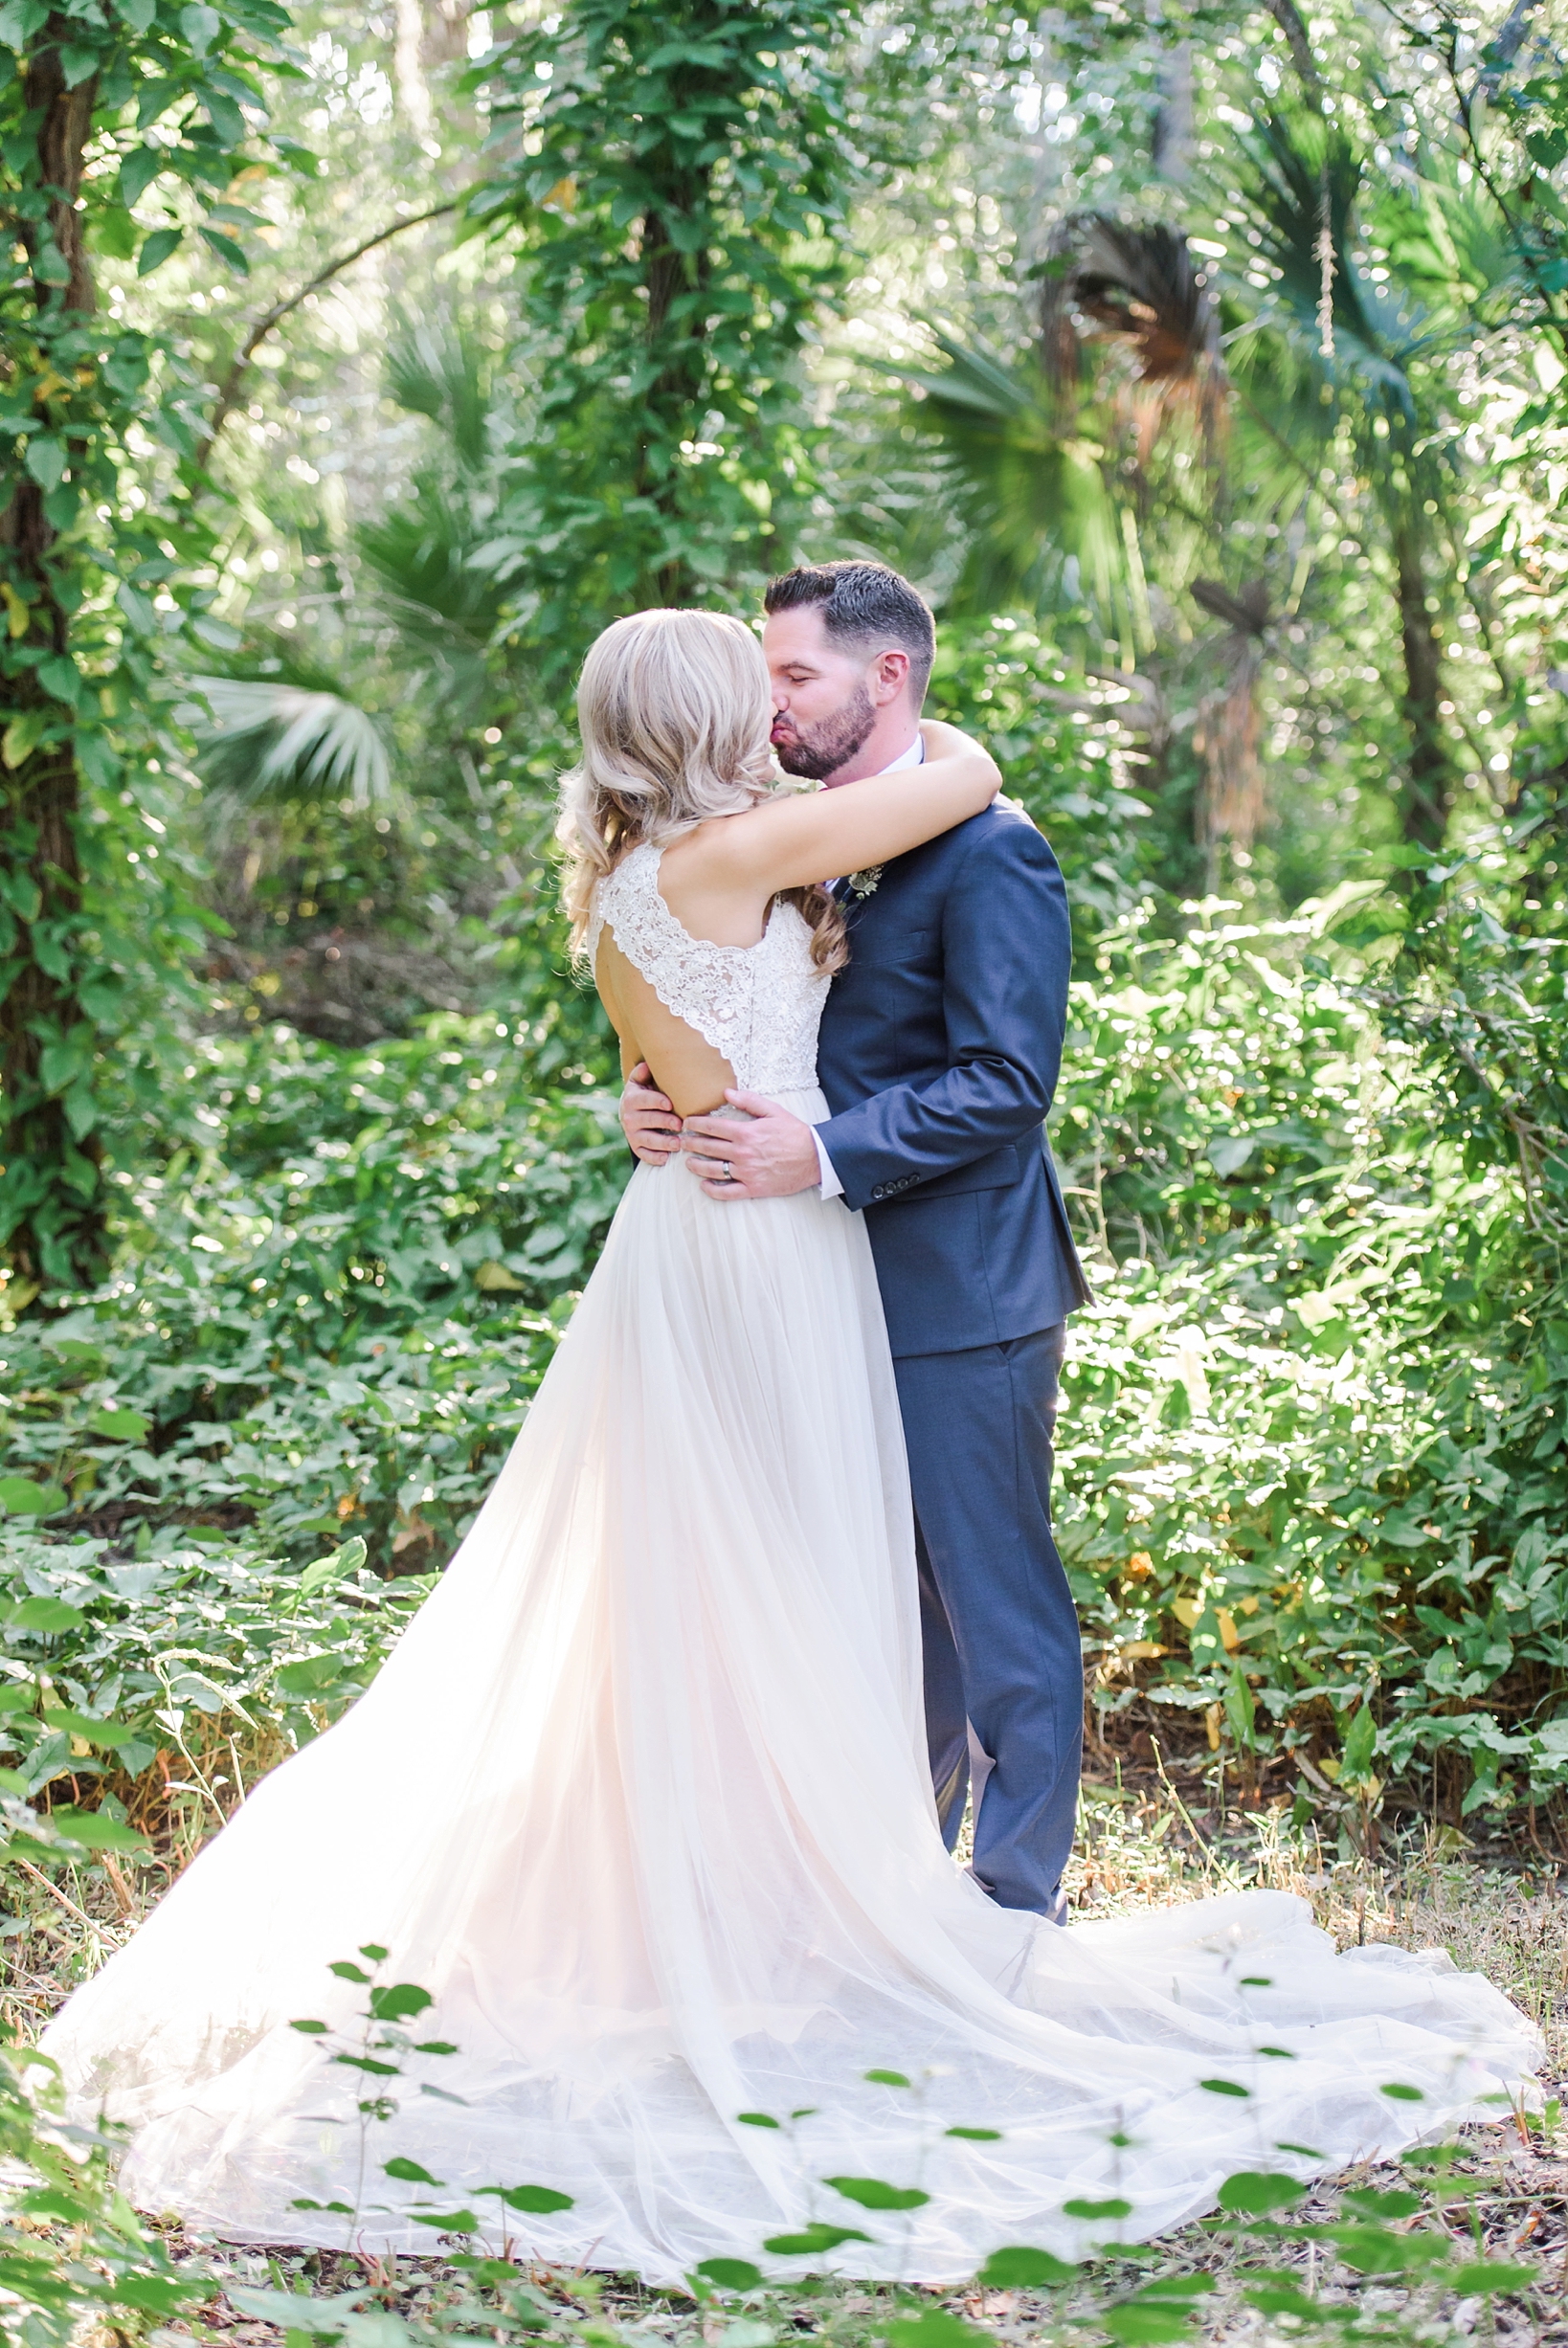 Amazing bridal portraits of the couple in the forest by Sarah and Ben Photography